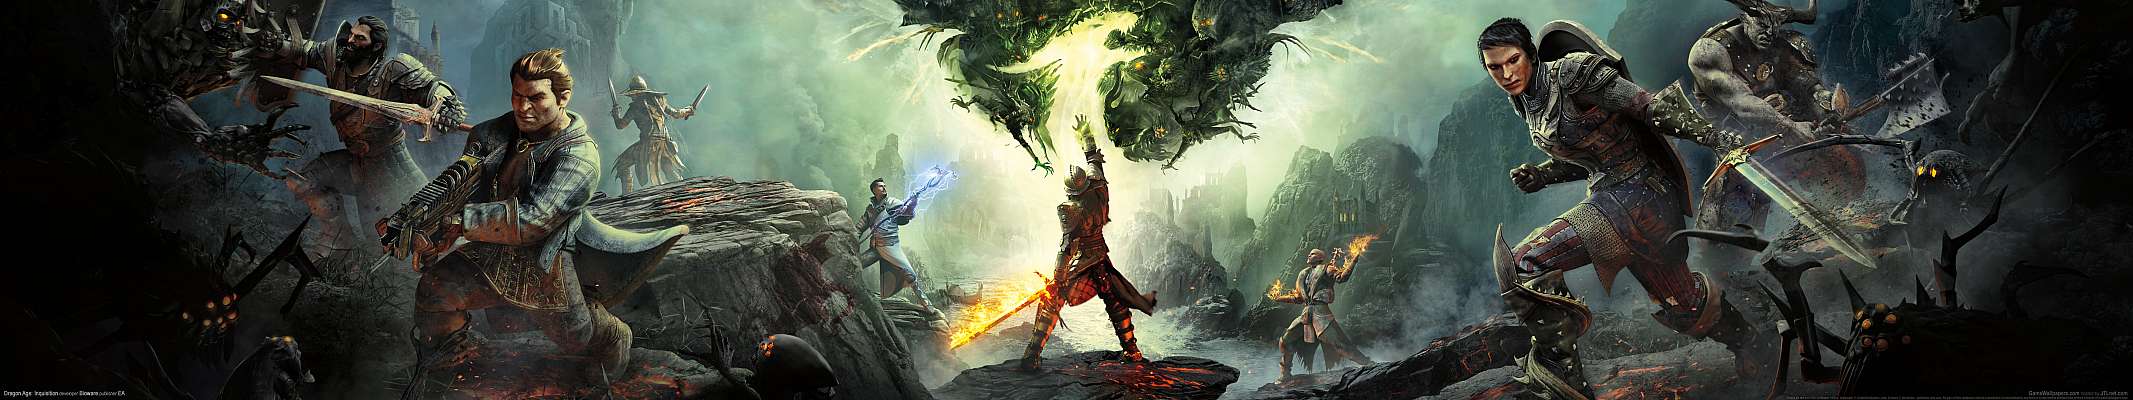 Dragon Age: Inquisition triple screen achtergrond